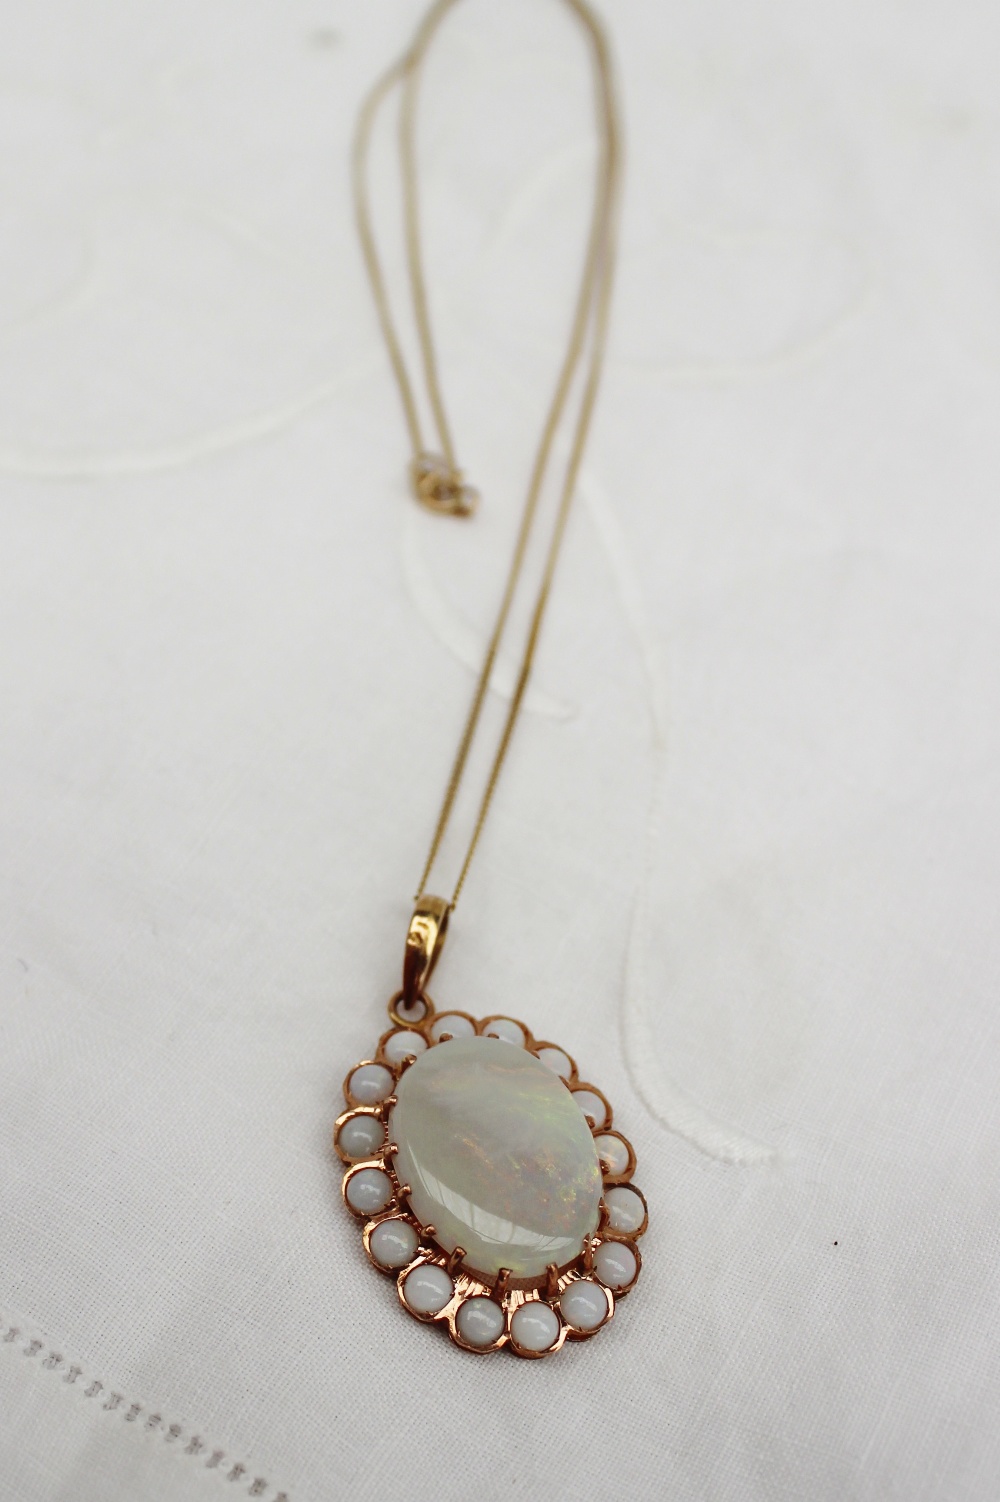 An opal pendant of large oval form surrounded by sixteen smaller circular opals to a yellow metal